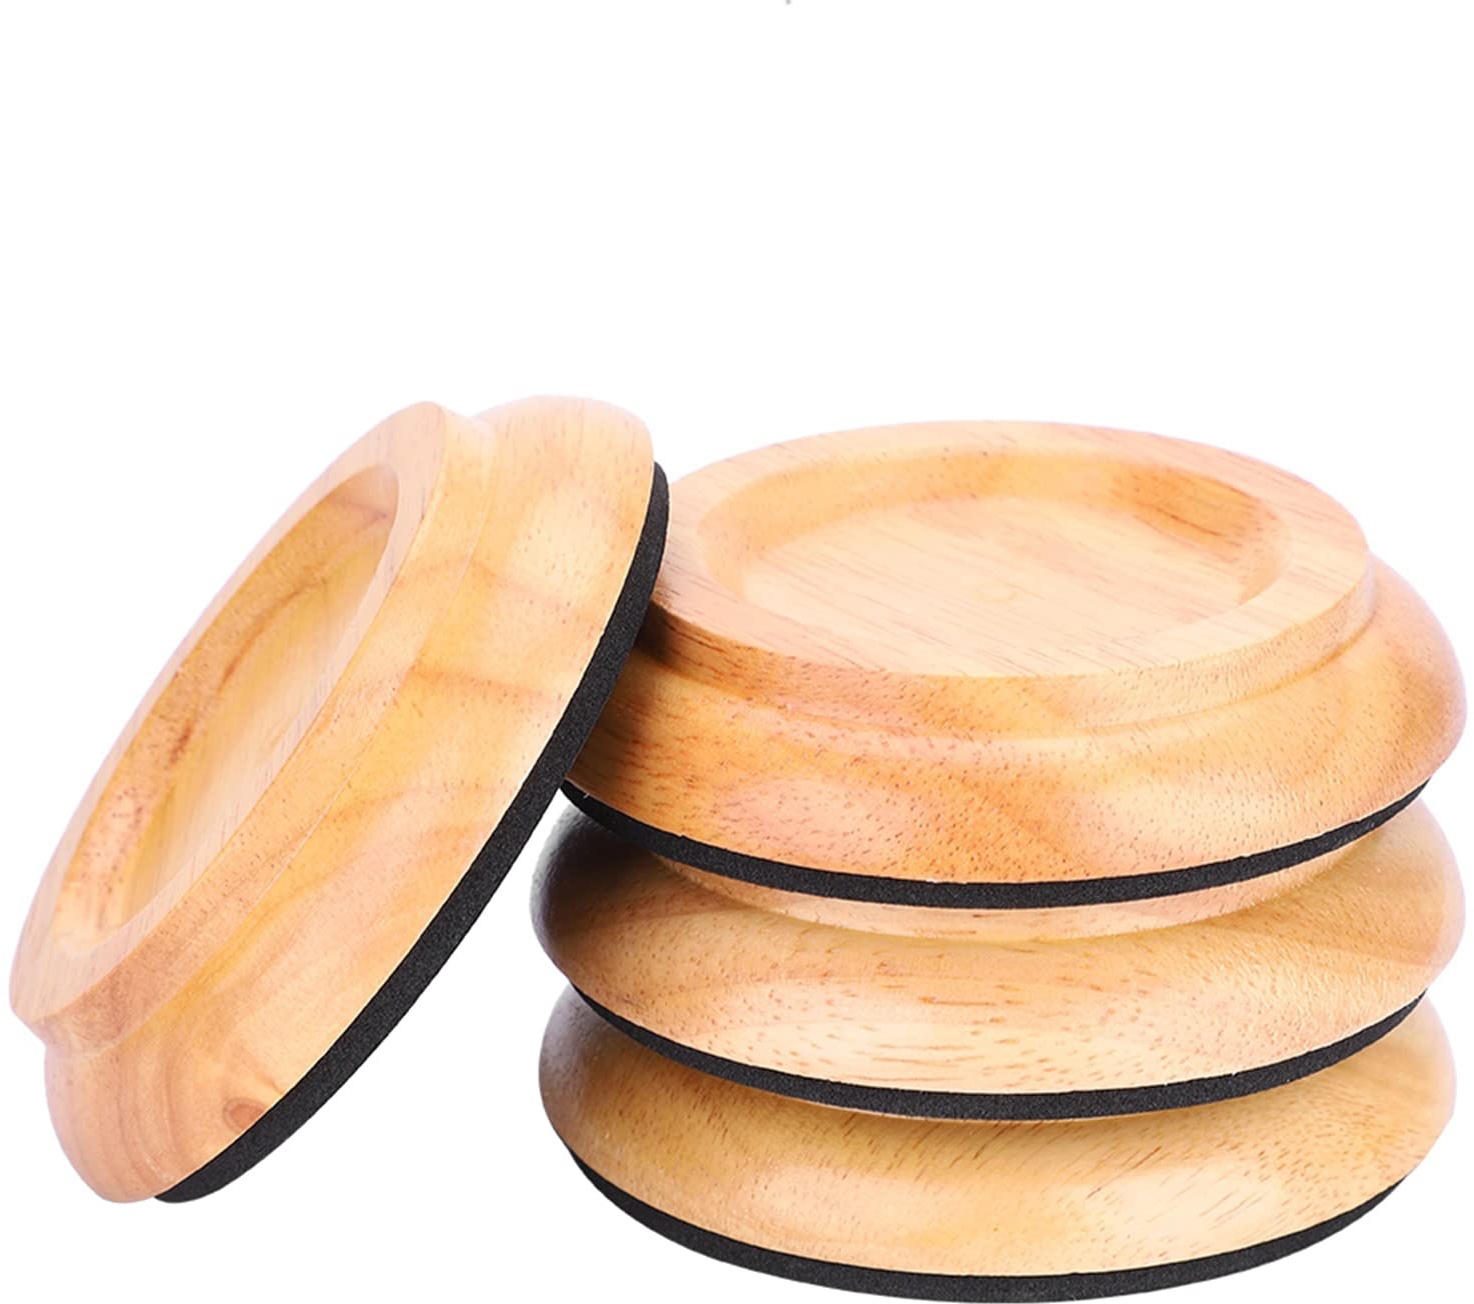 4Pcs Piano Caster Cups Holz Piano Caster Upright Piano Bein Bodenschoner Rutschfest(Color)